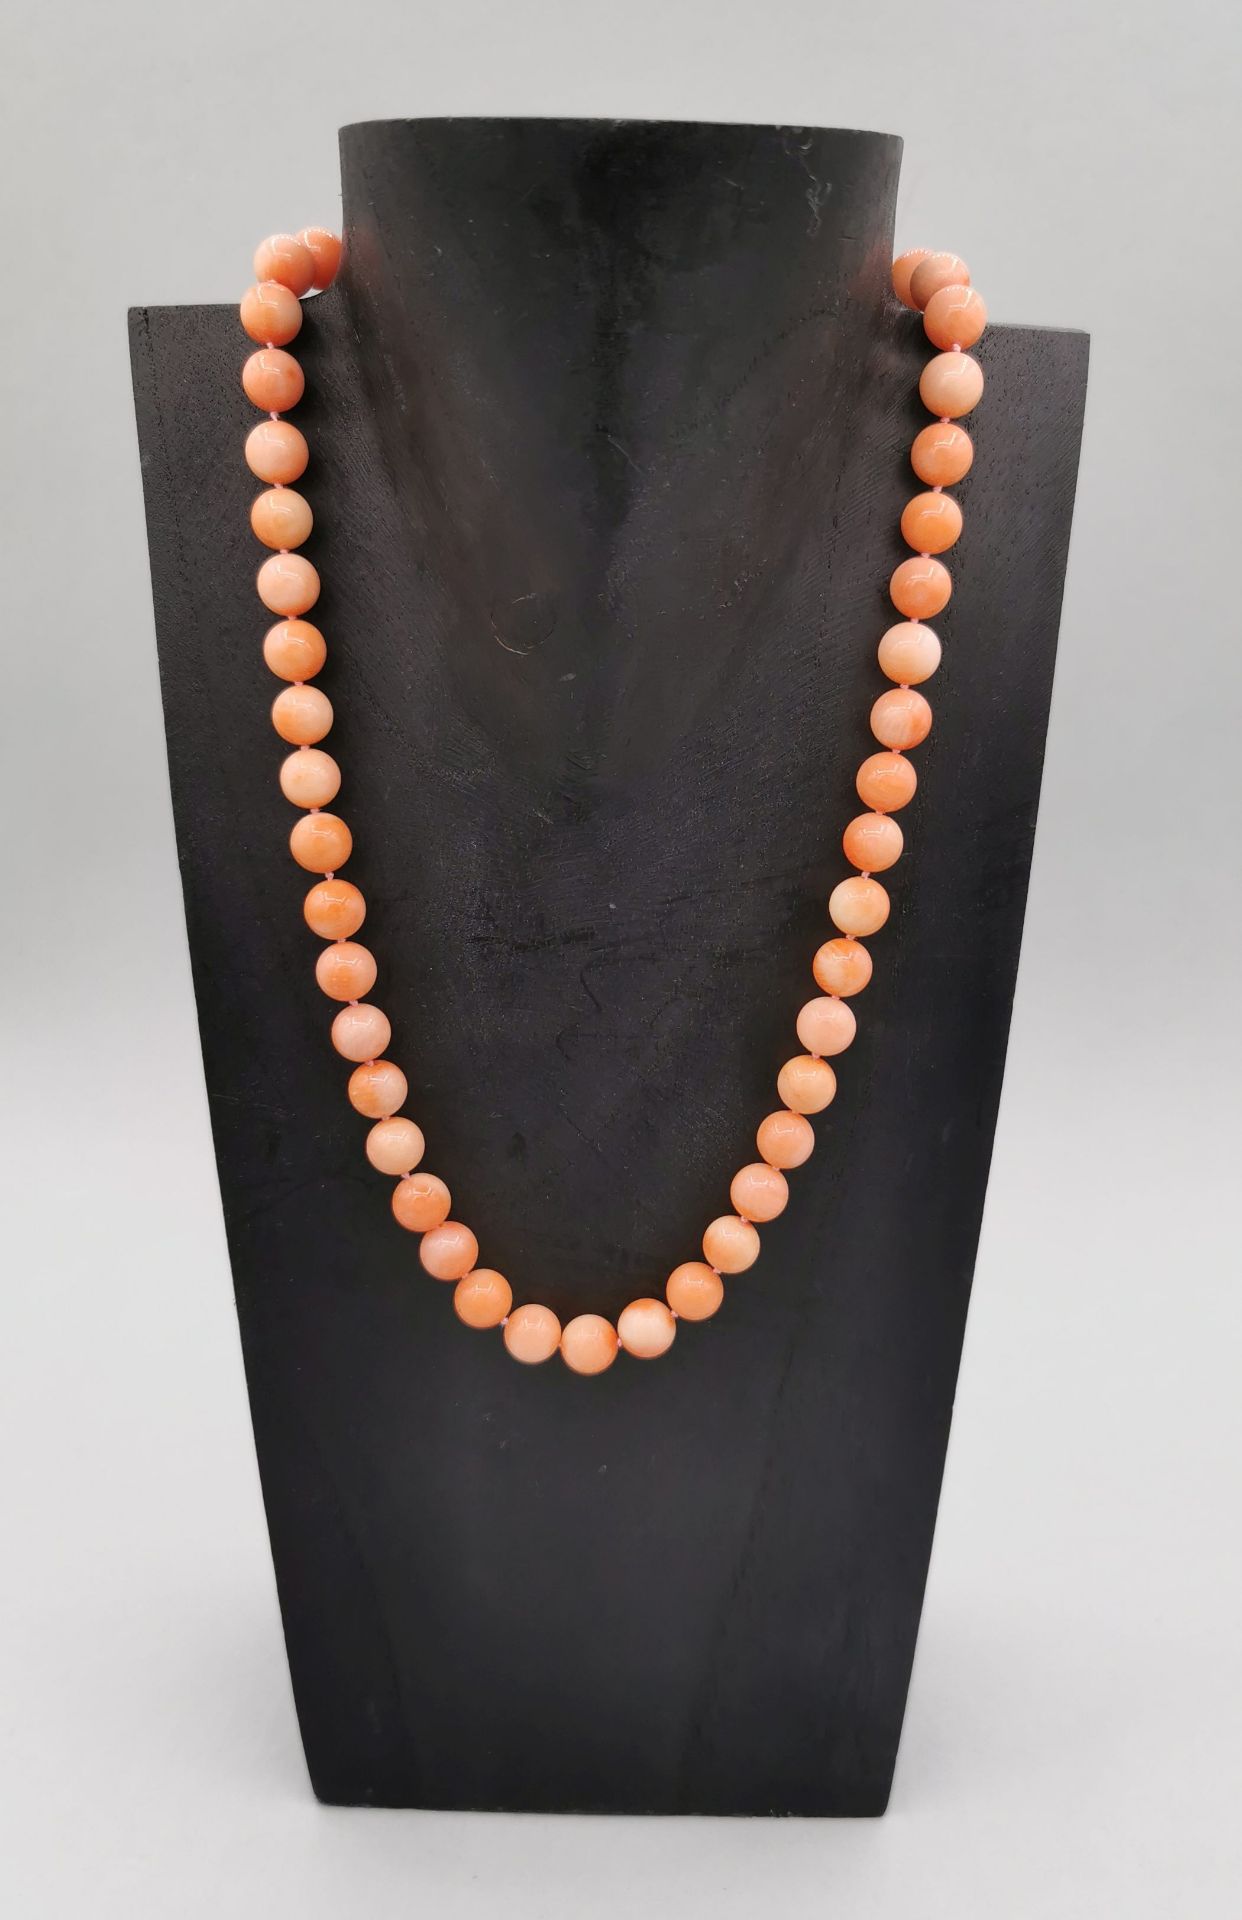 2 ENGEL SKIN CORAL - CHAINS - Image 4 of 4